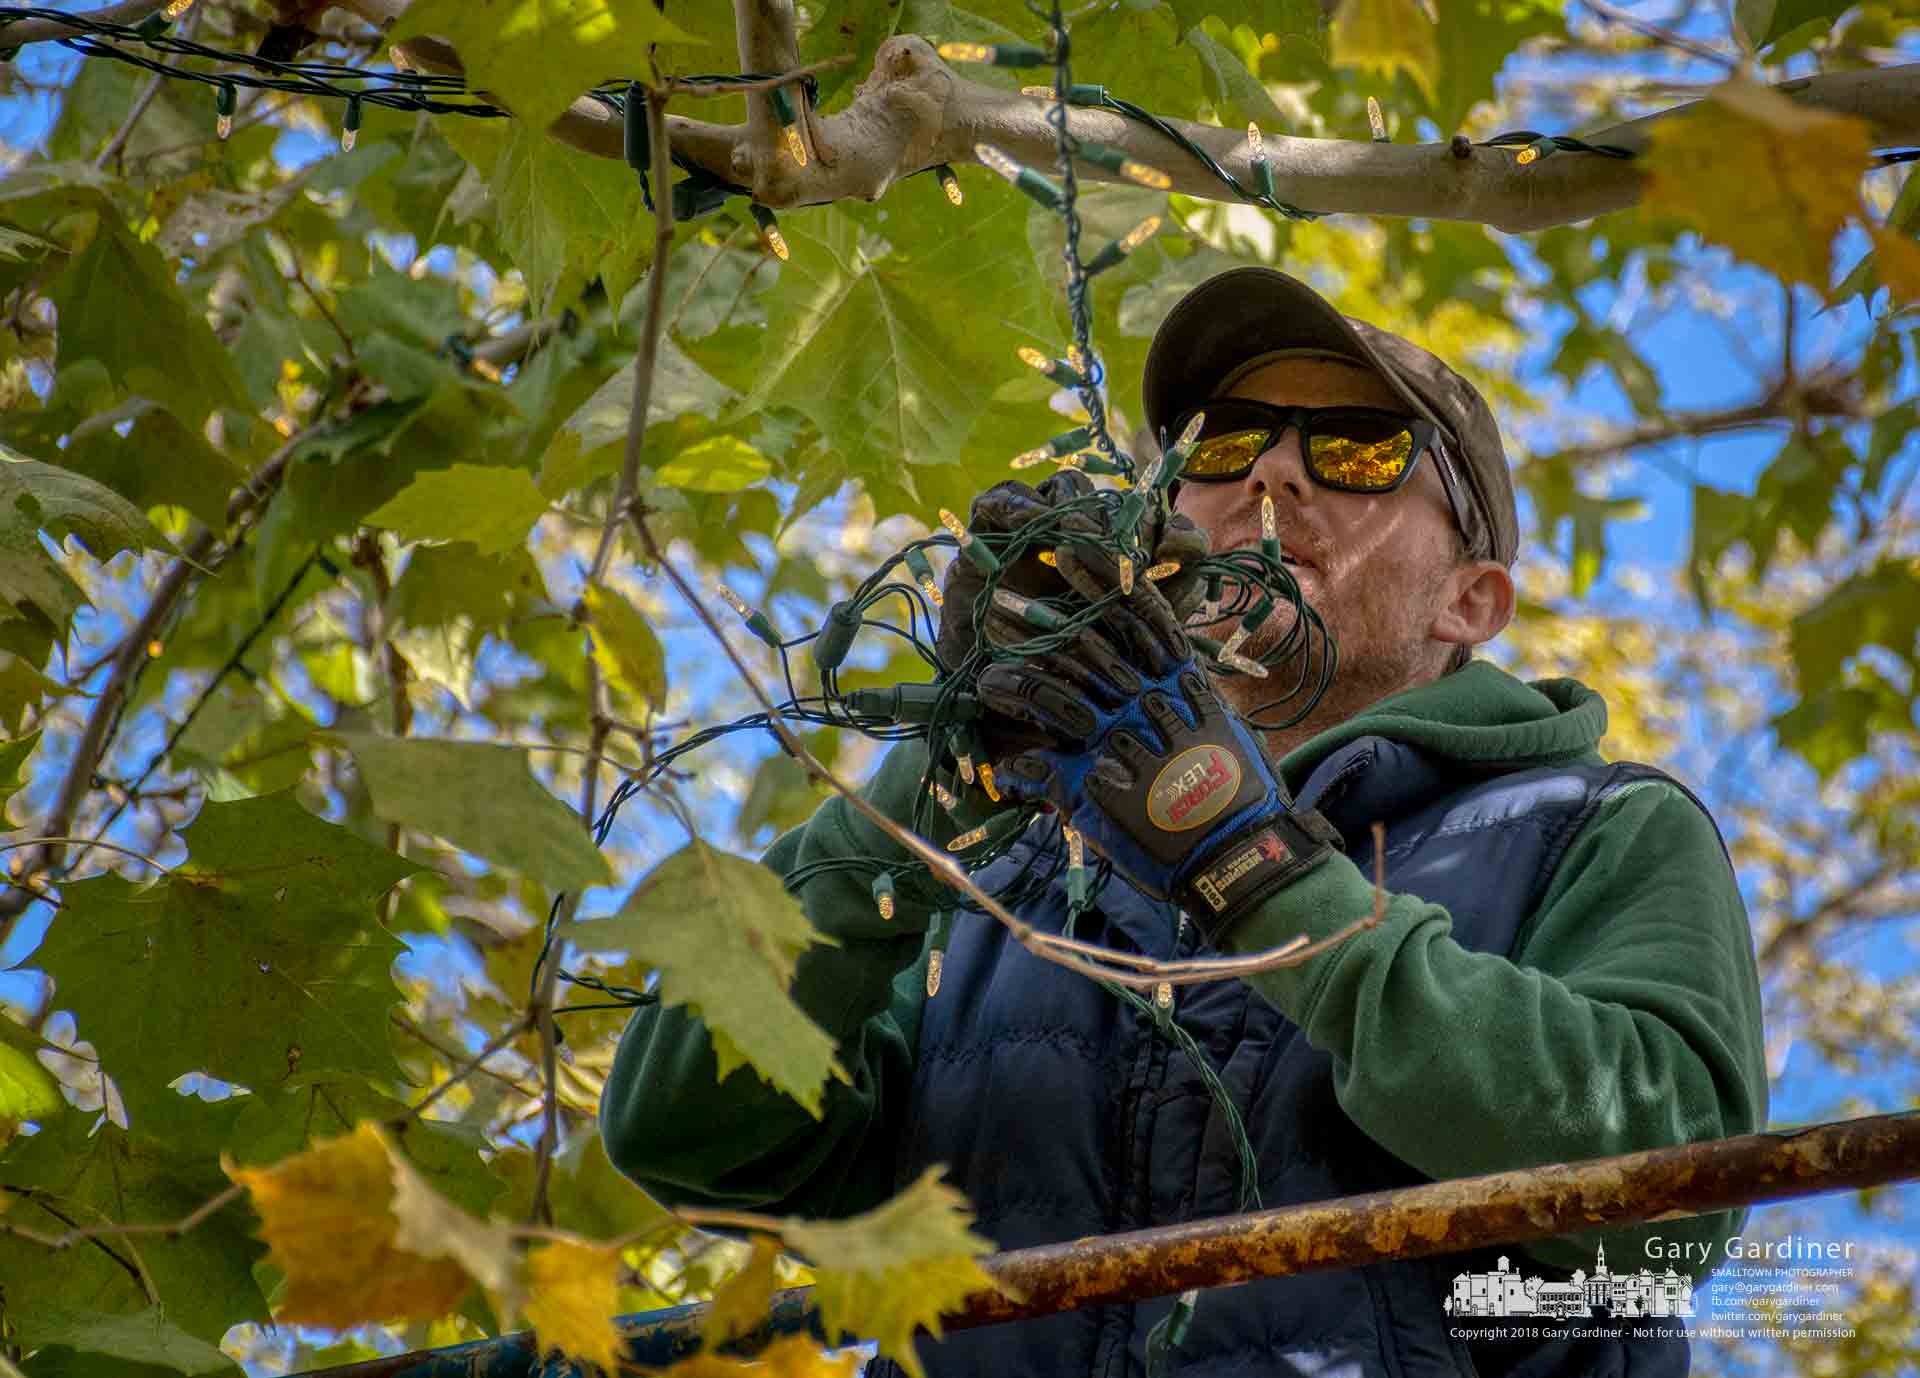 City park workers began installing holiday lights in the trees at Heritage Park in advance of Christmas season ceremonies and events despite having to wrap the cables and lines over and around leaves which have yet to have fallen to the ground. My Final Photo for Oct. 23, 2018.